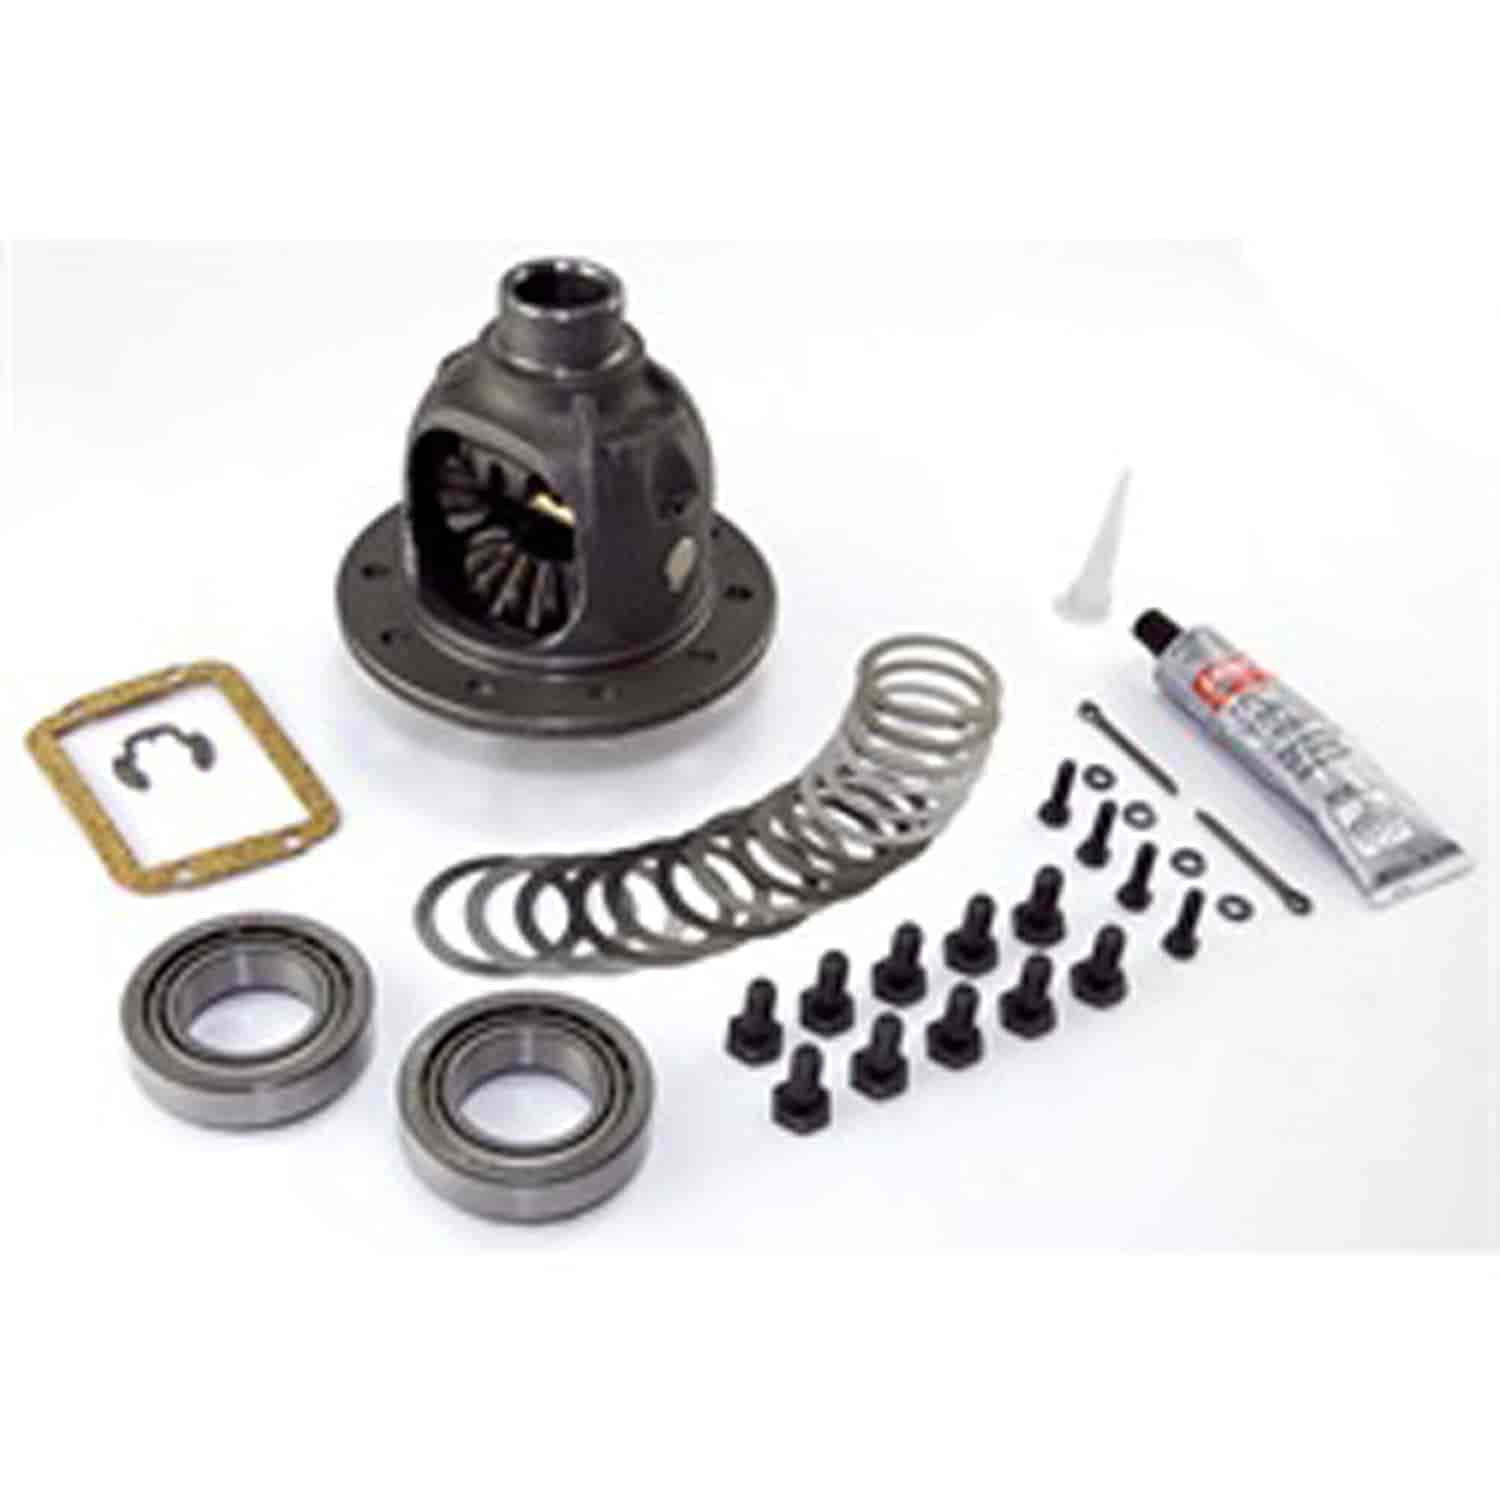 This standard differential case assembly kit from Omix-ADA